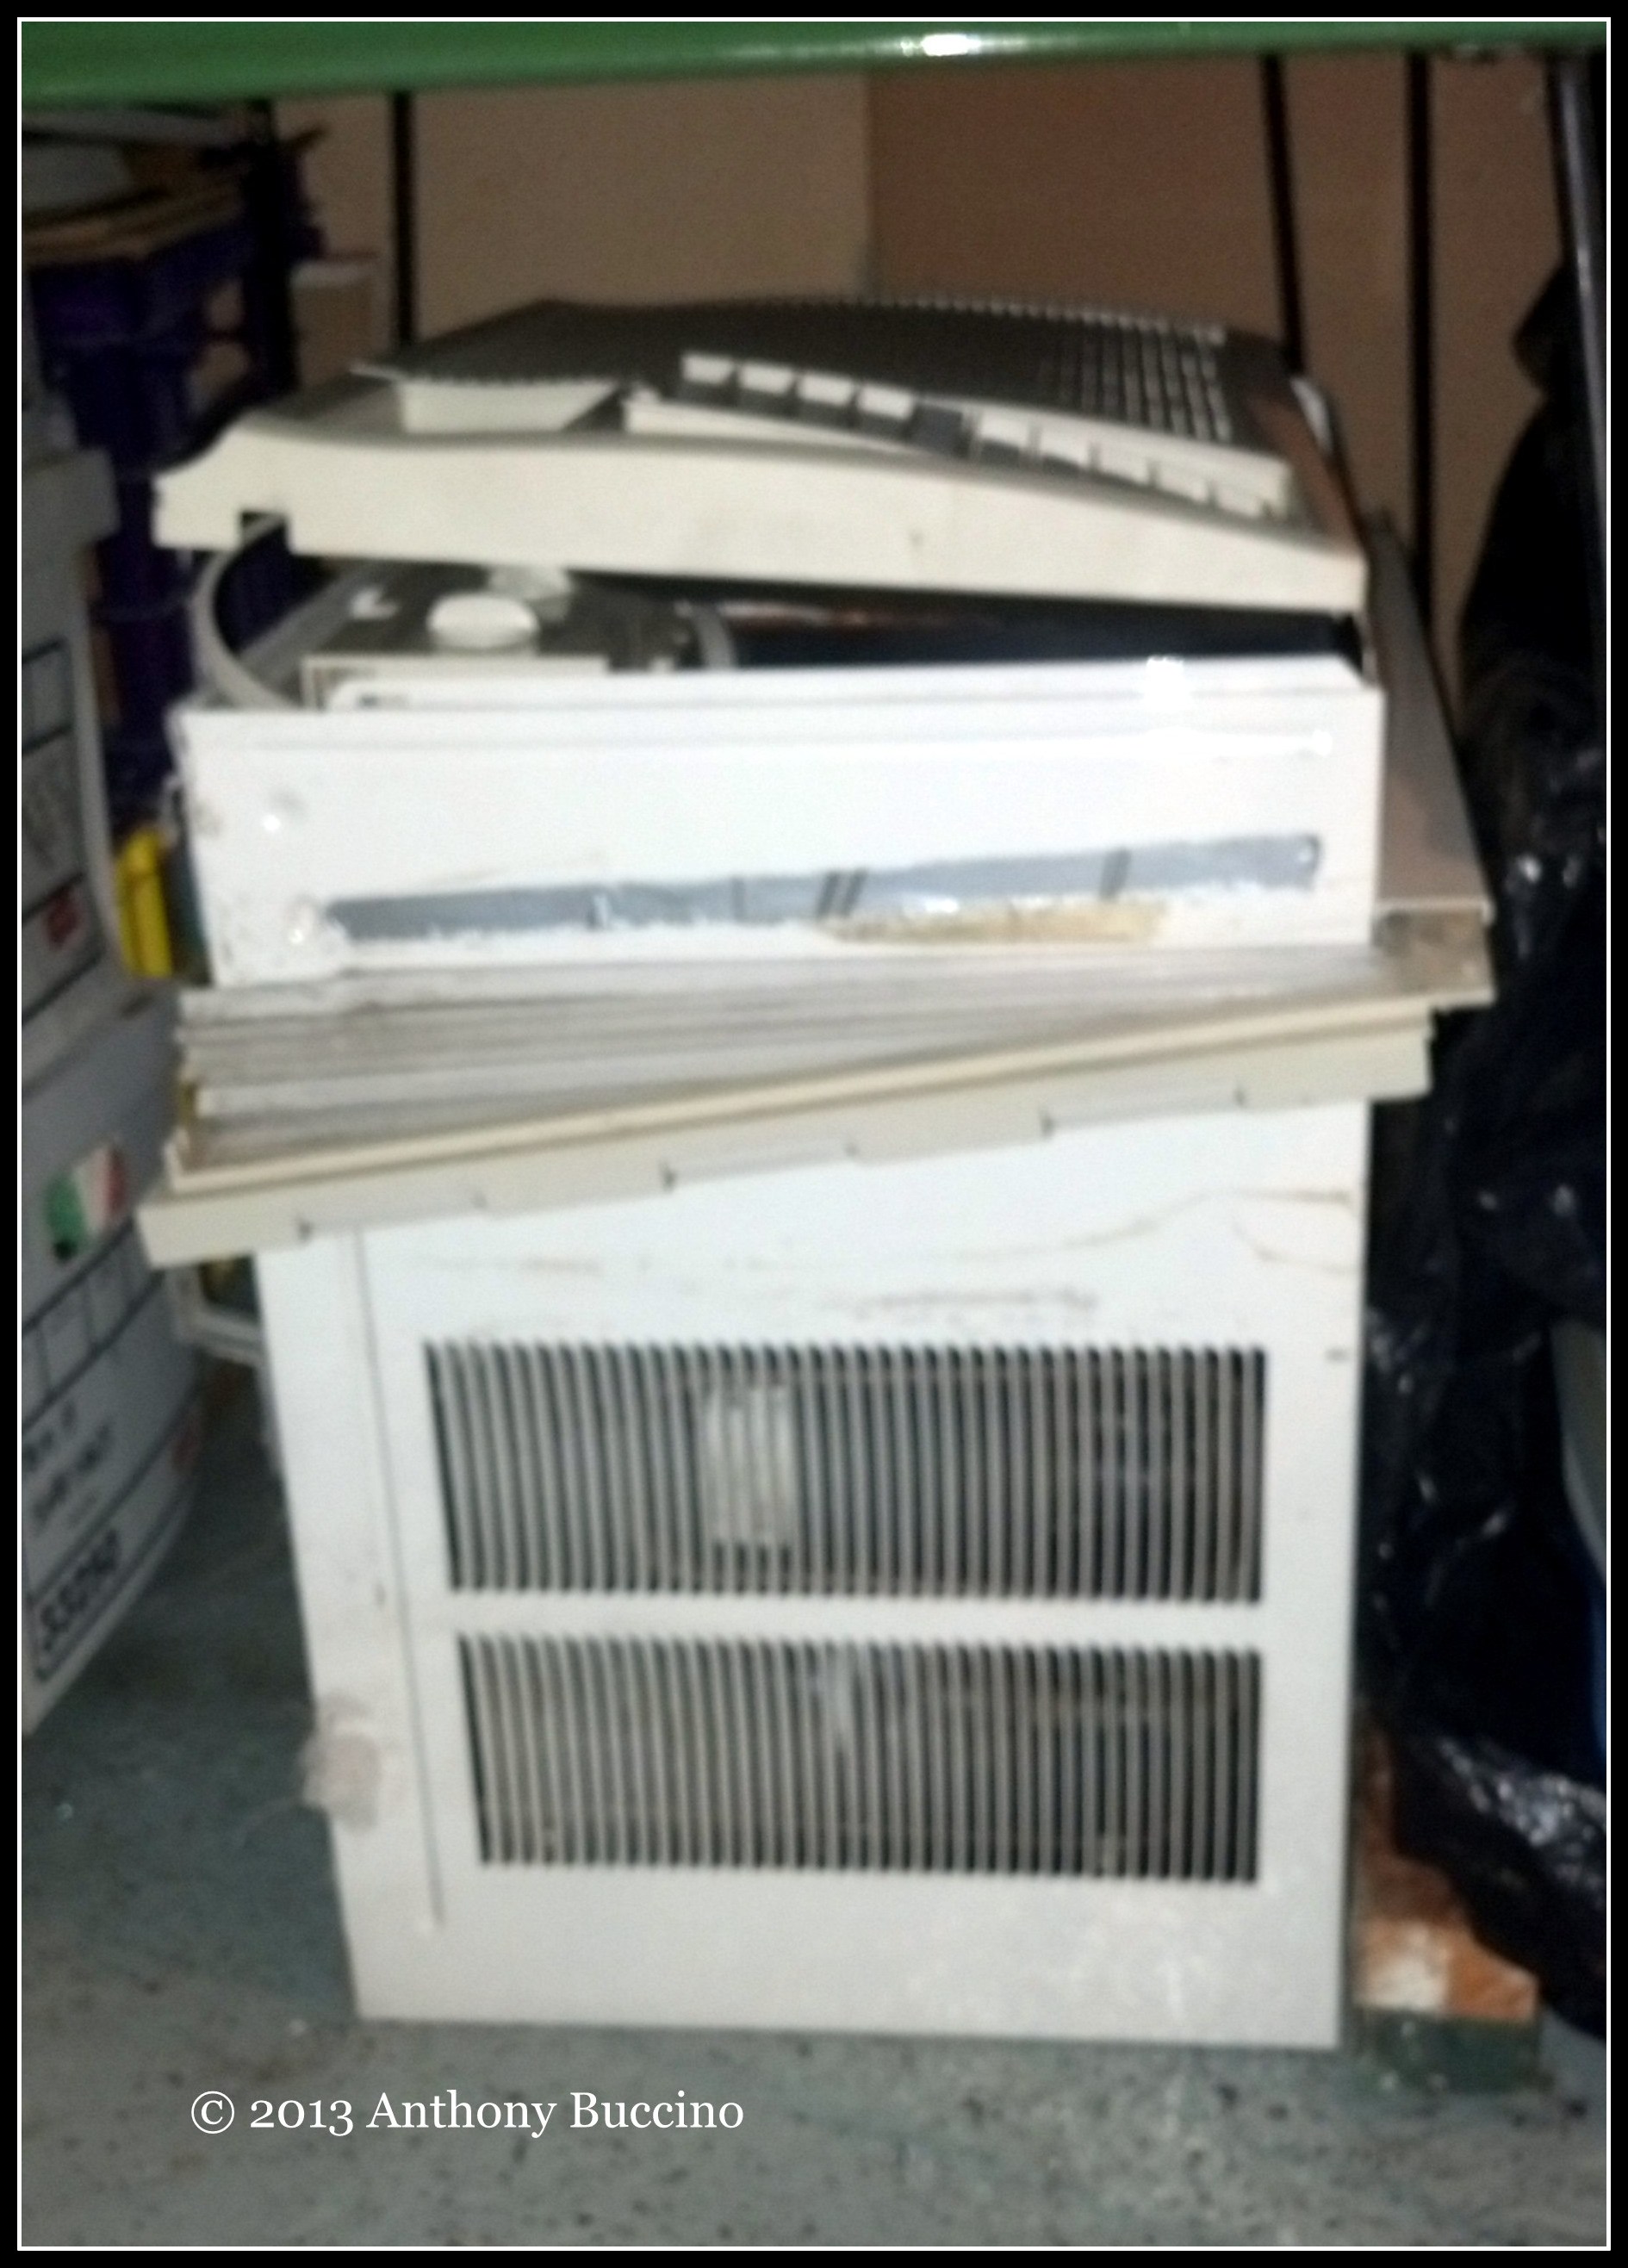  A Buccino 2013, all rights reserved. Window air conditioner, 10k BTU, don't make them like this anymore